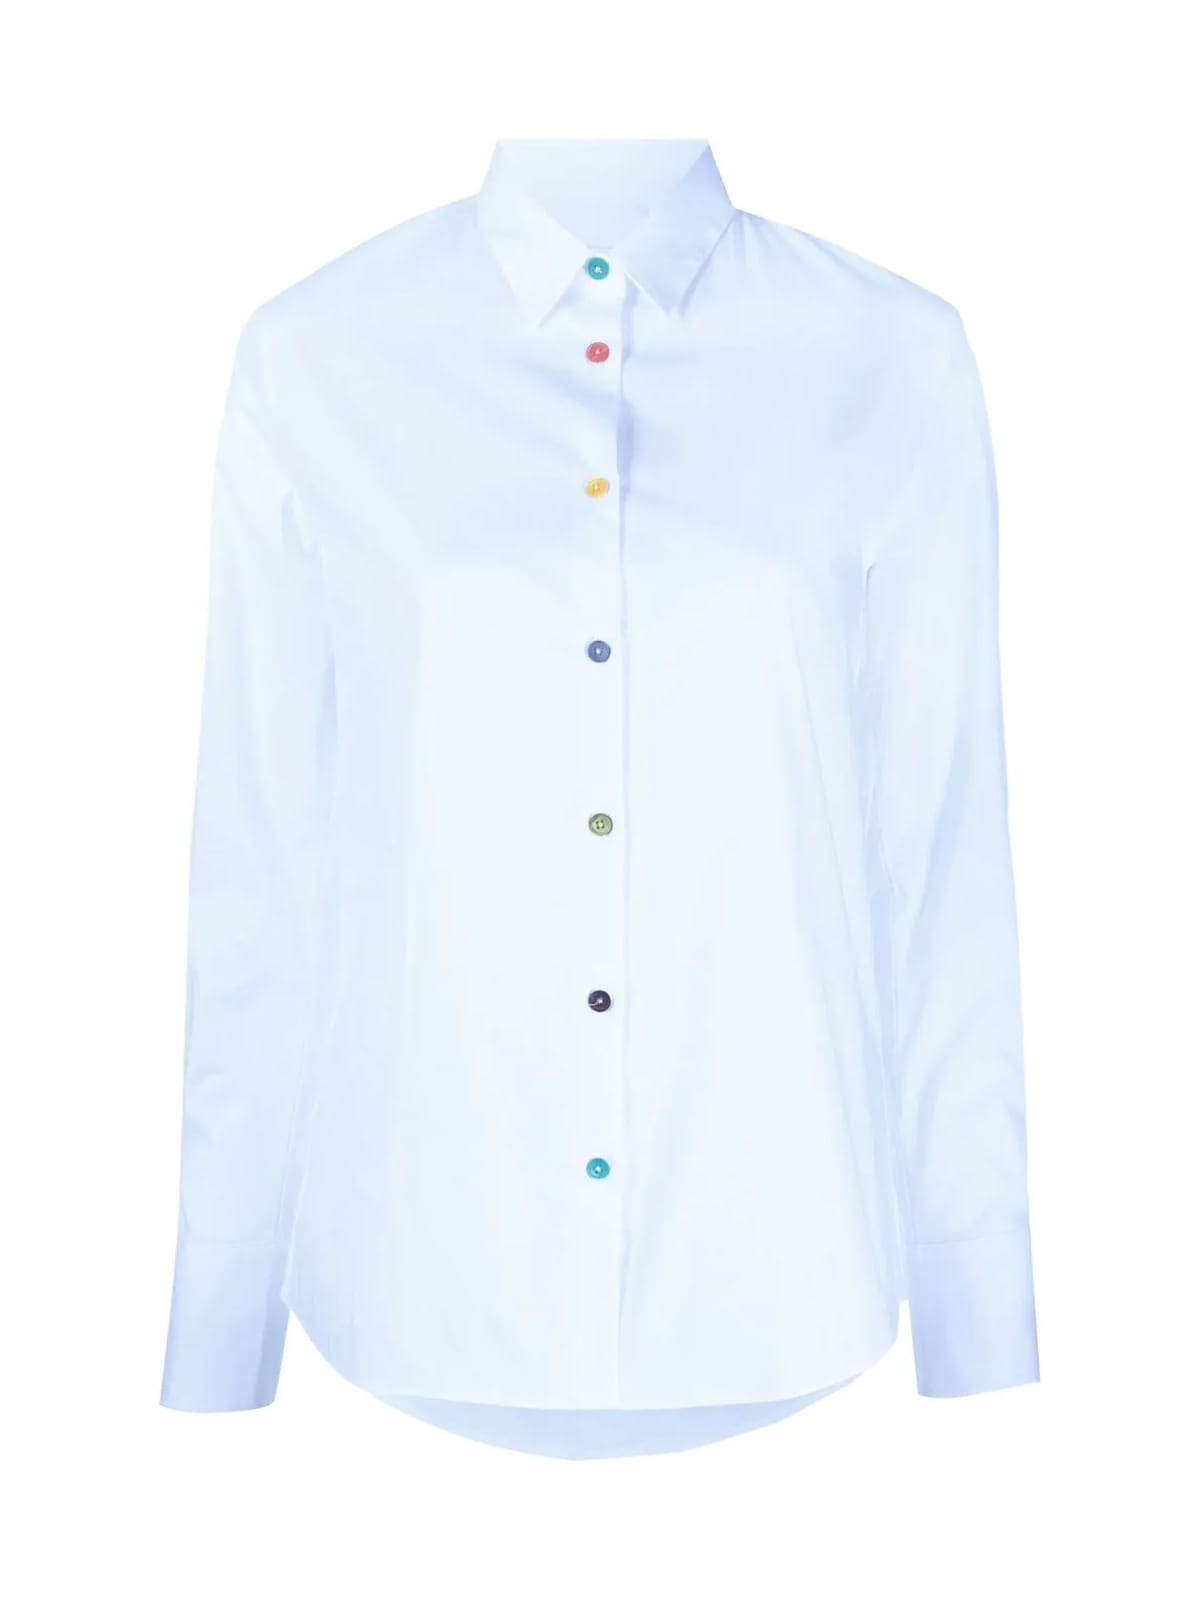 PS by Paul Smith Cotton Shirt With Cuff Detail